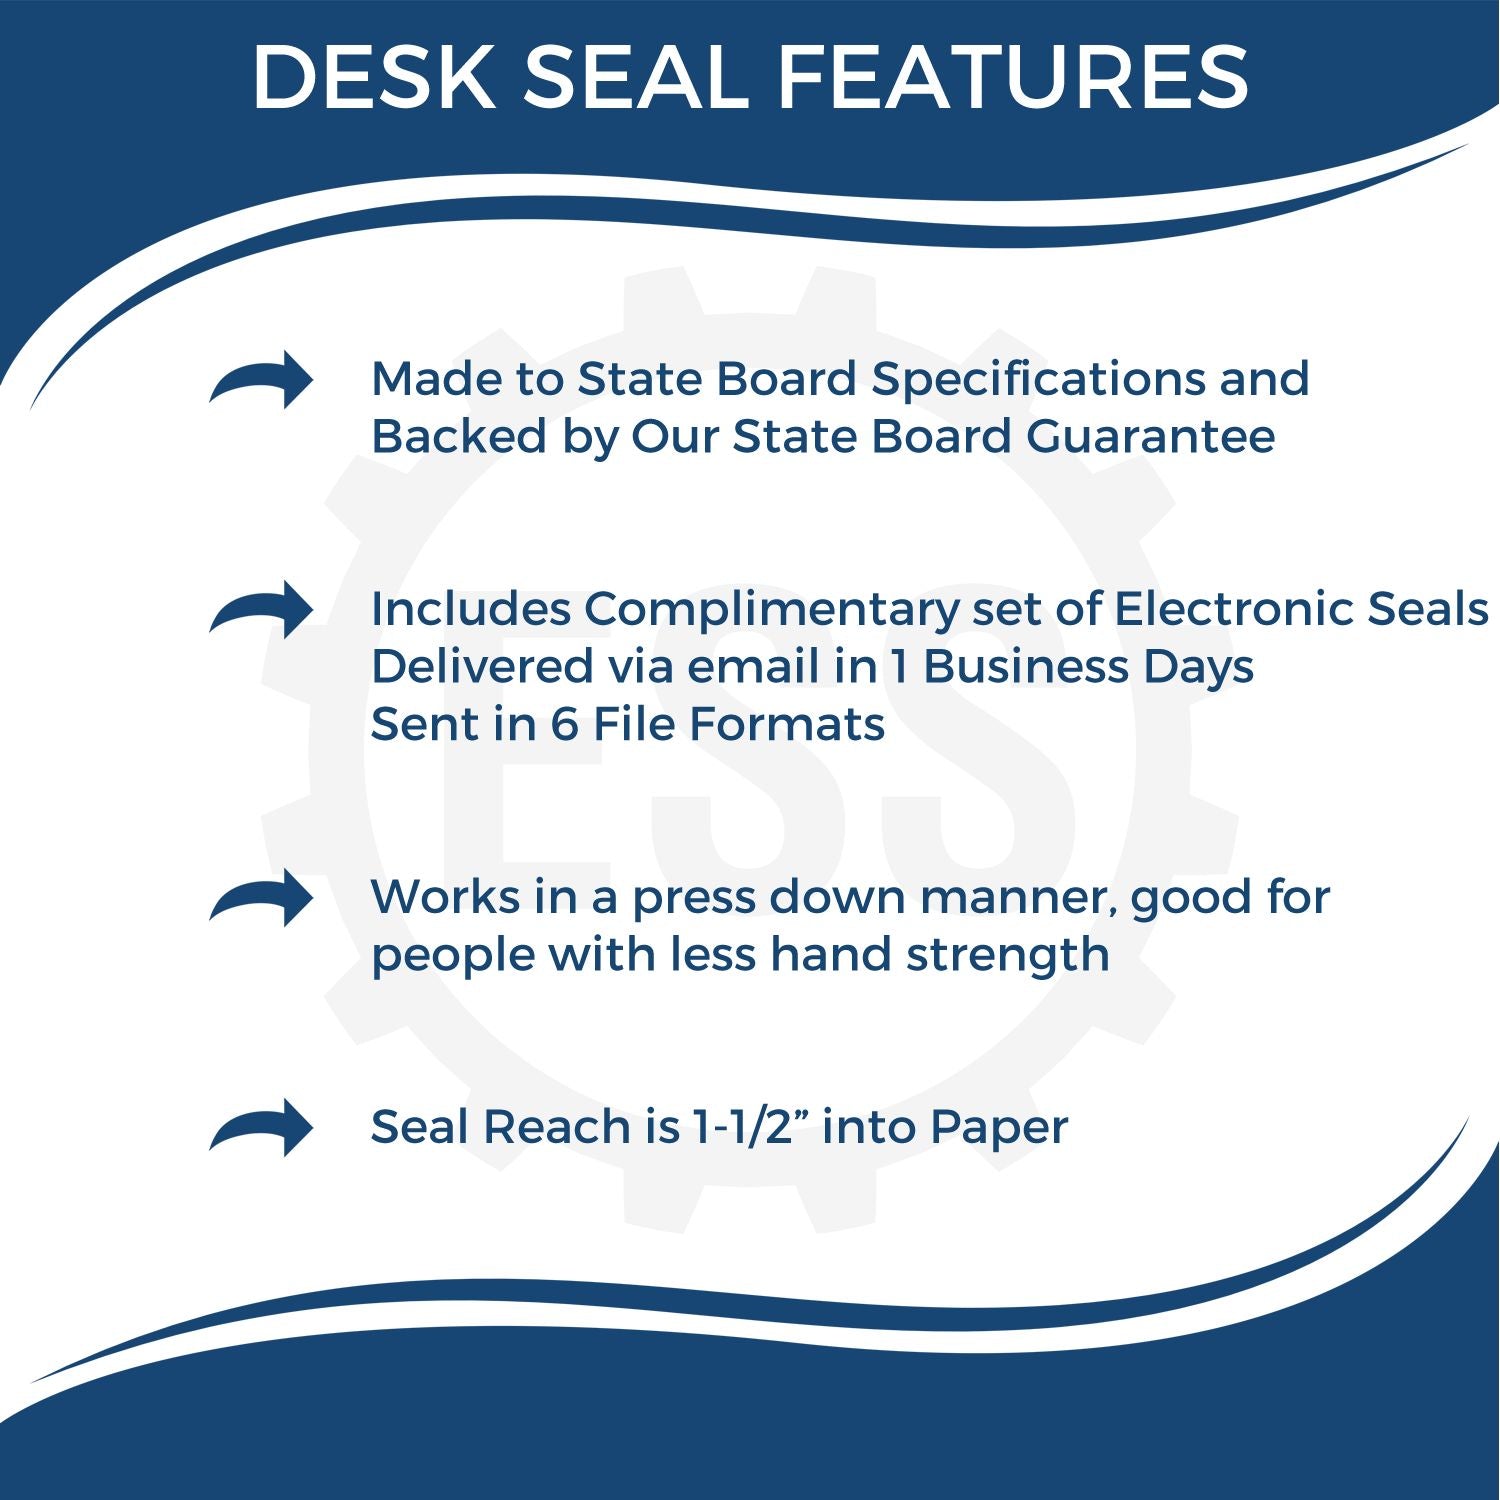 A picture of an infographic highlighting the selling points for the Virginia Desk Surveyor Seal Embosser